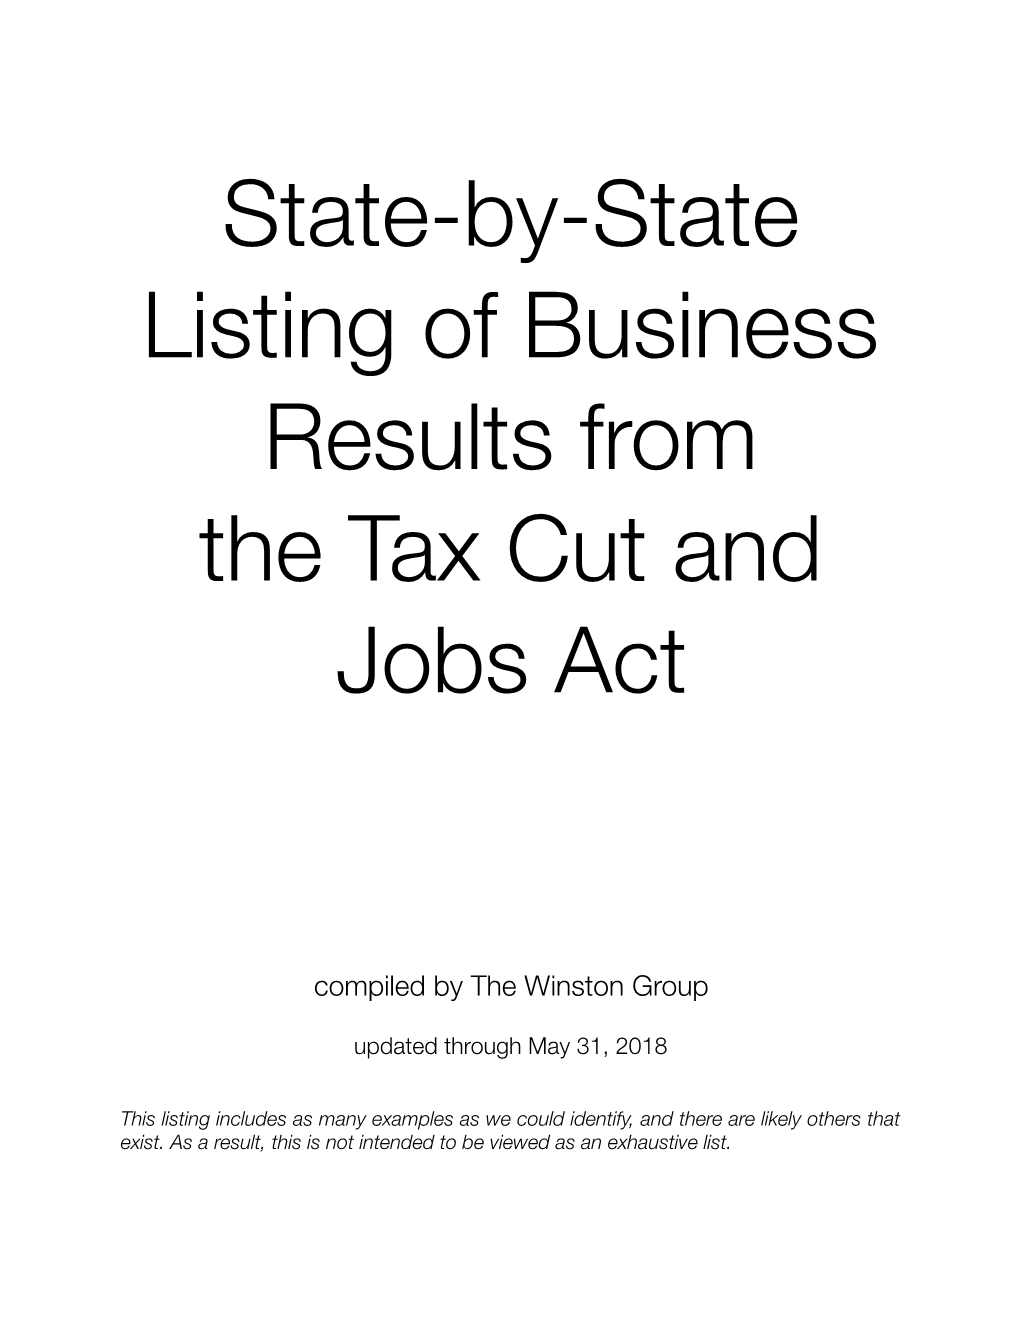 State Examples of TCJA Updated May 31 2018